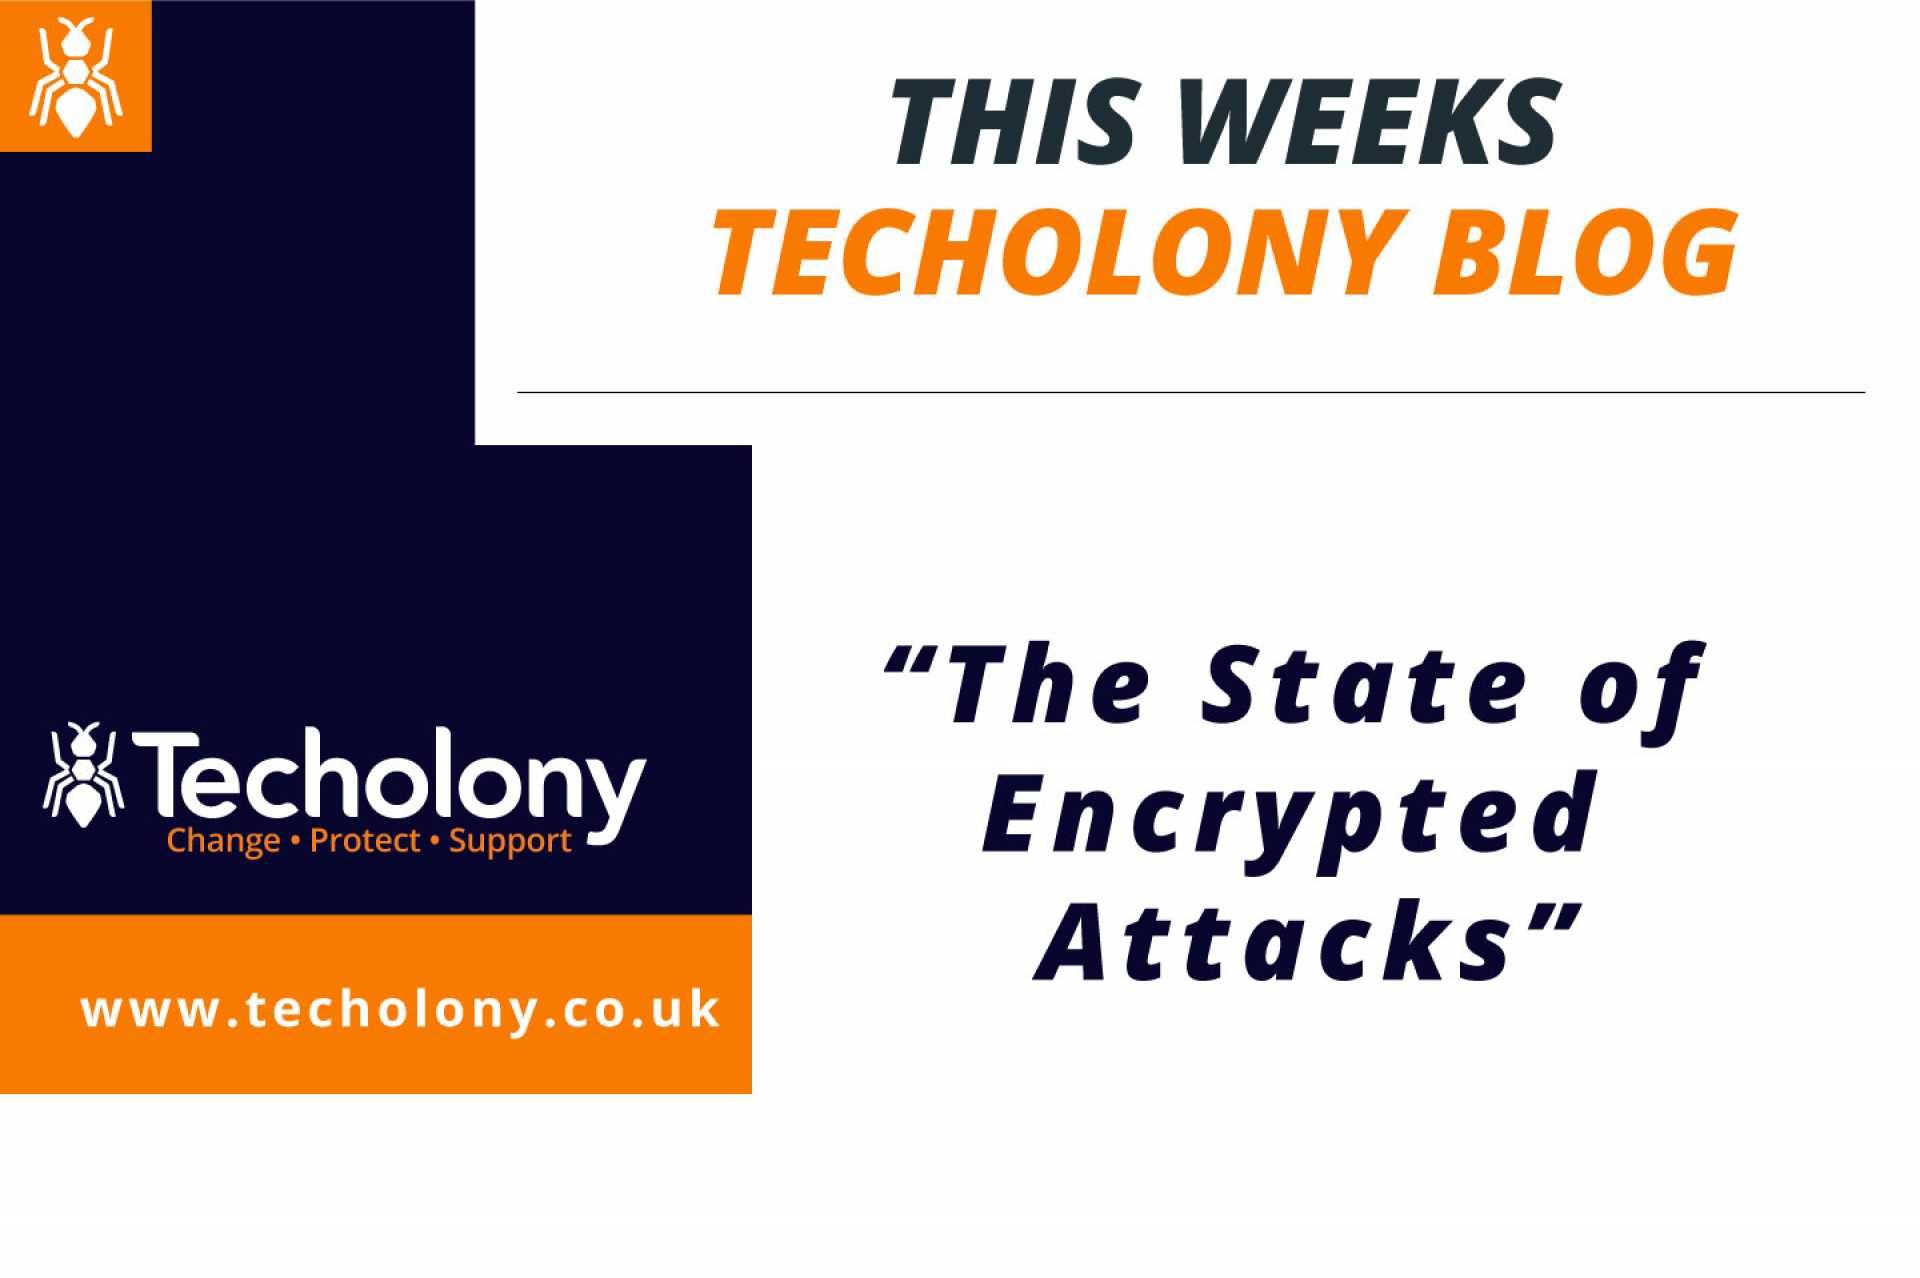 The State of Encrypted Attacks